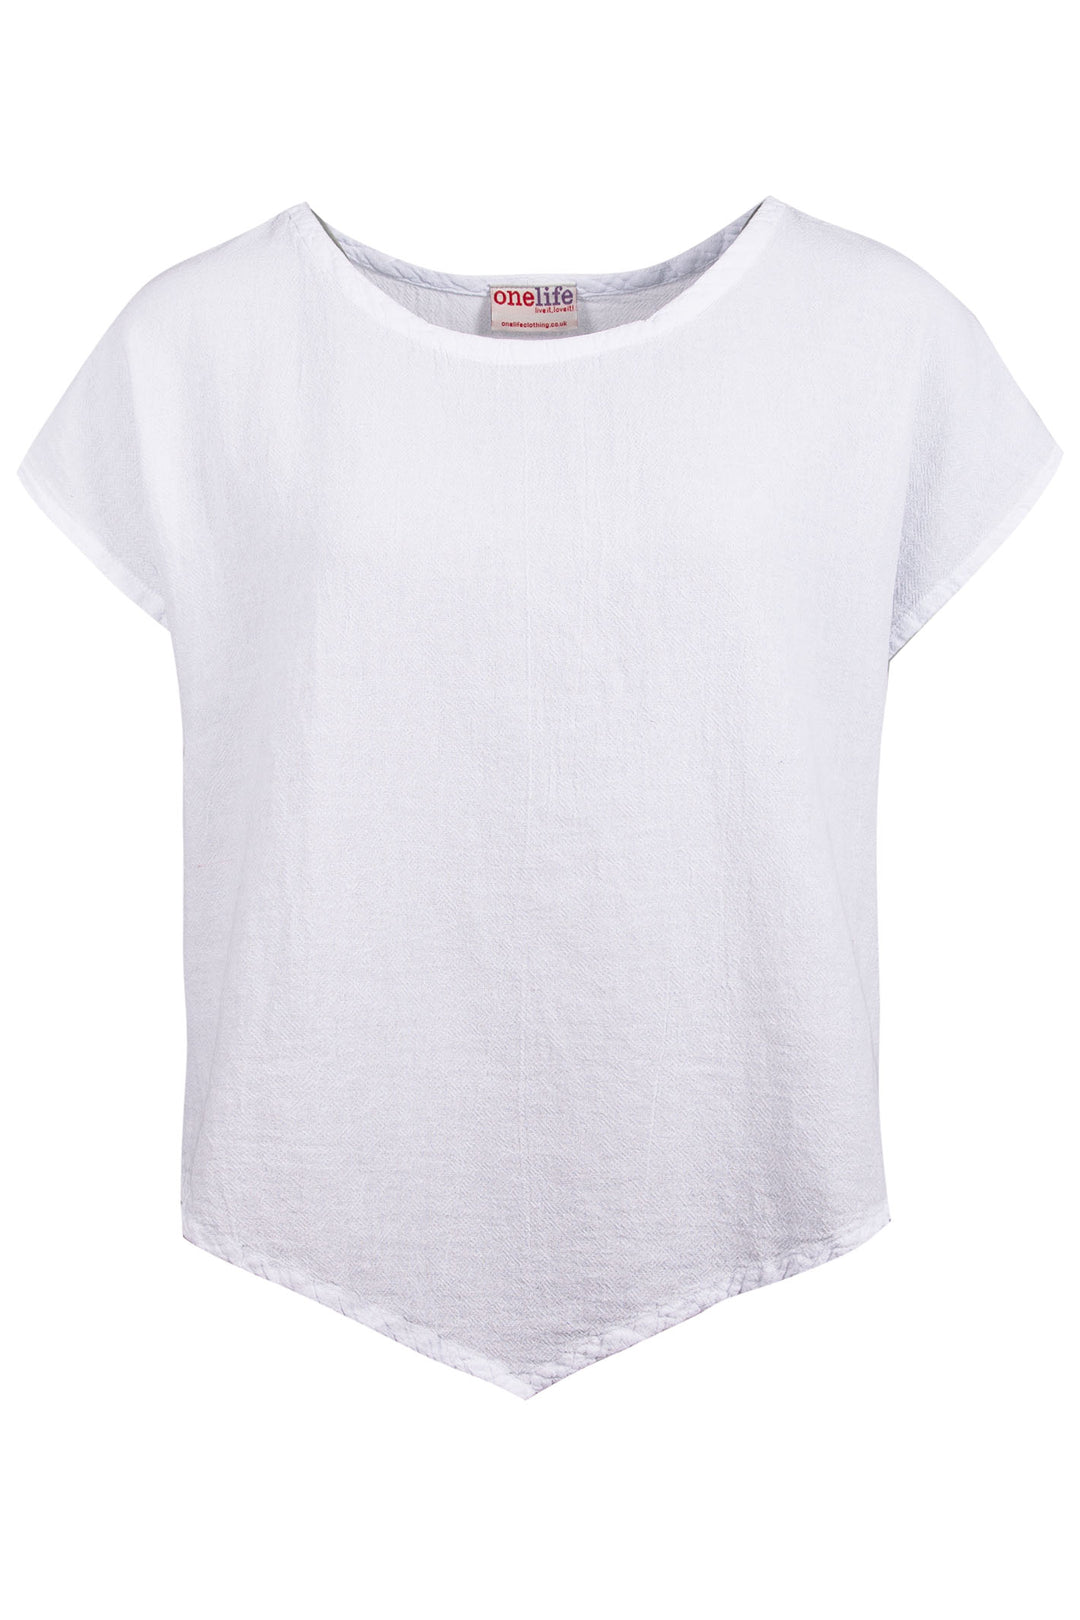 Onelife T002 Grace Snow White Boat Neck Cotton Top - Experience Boutique